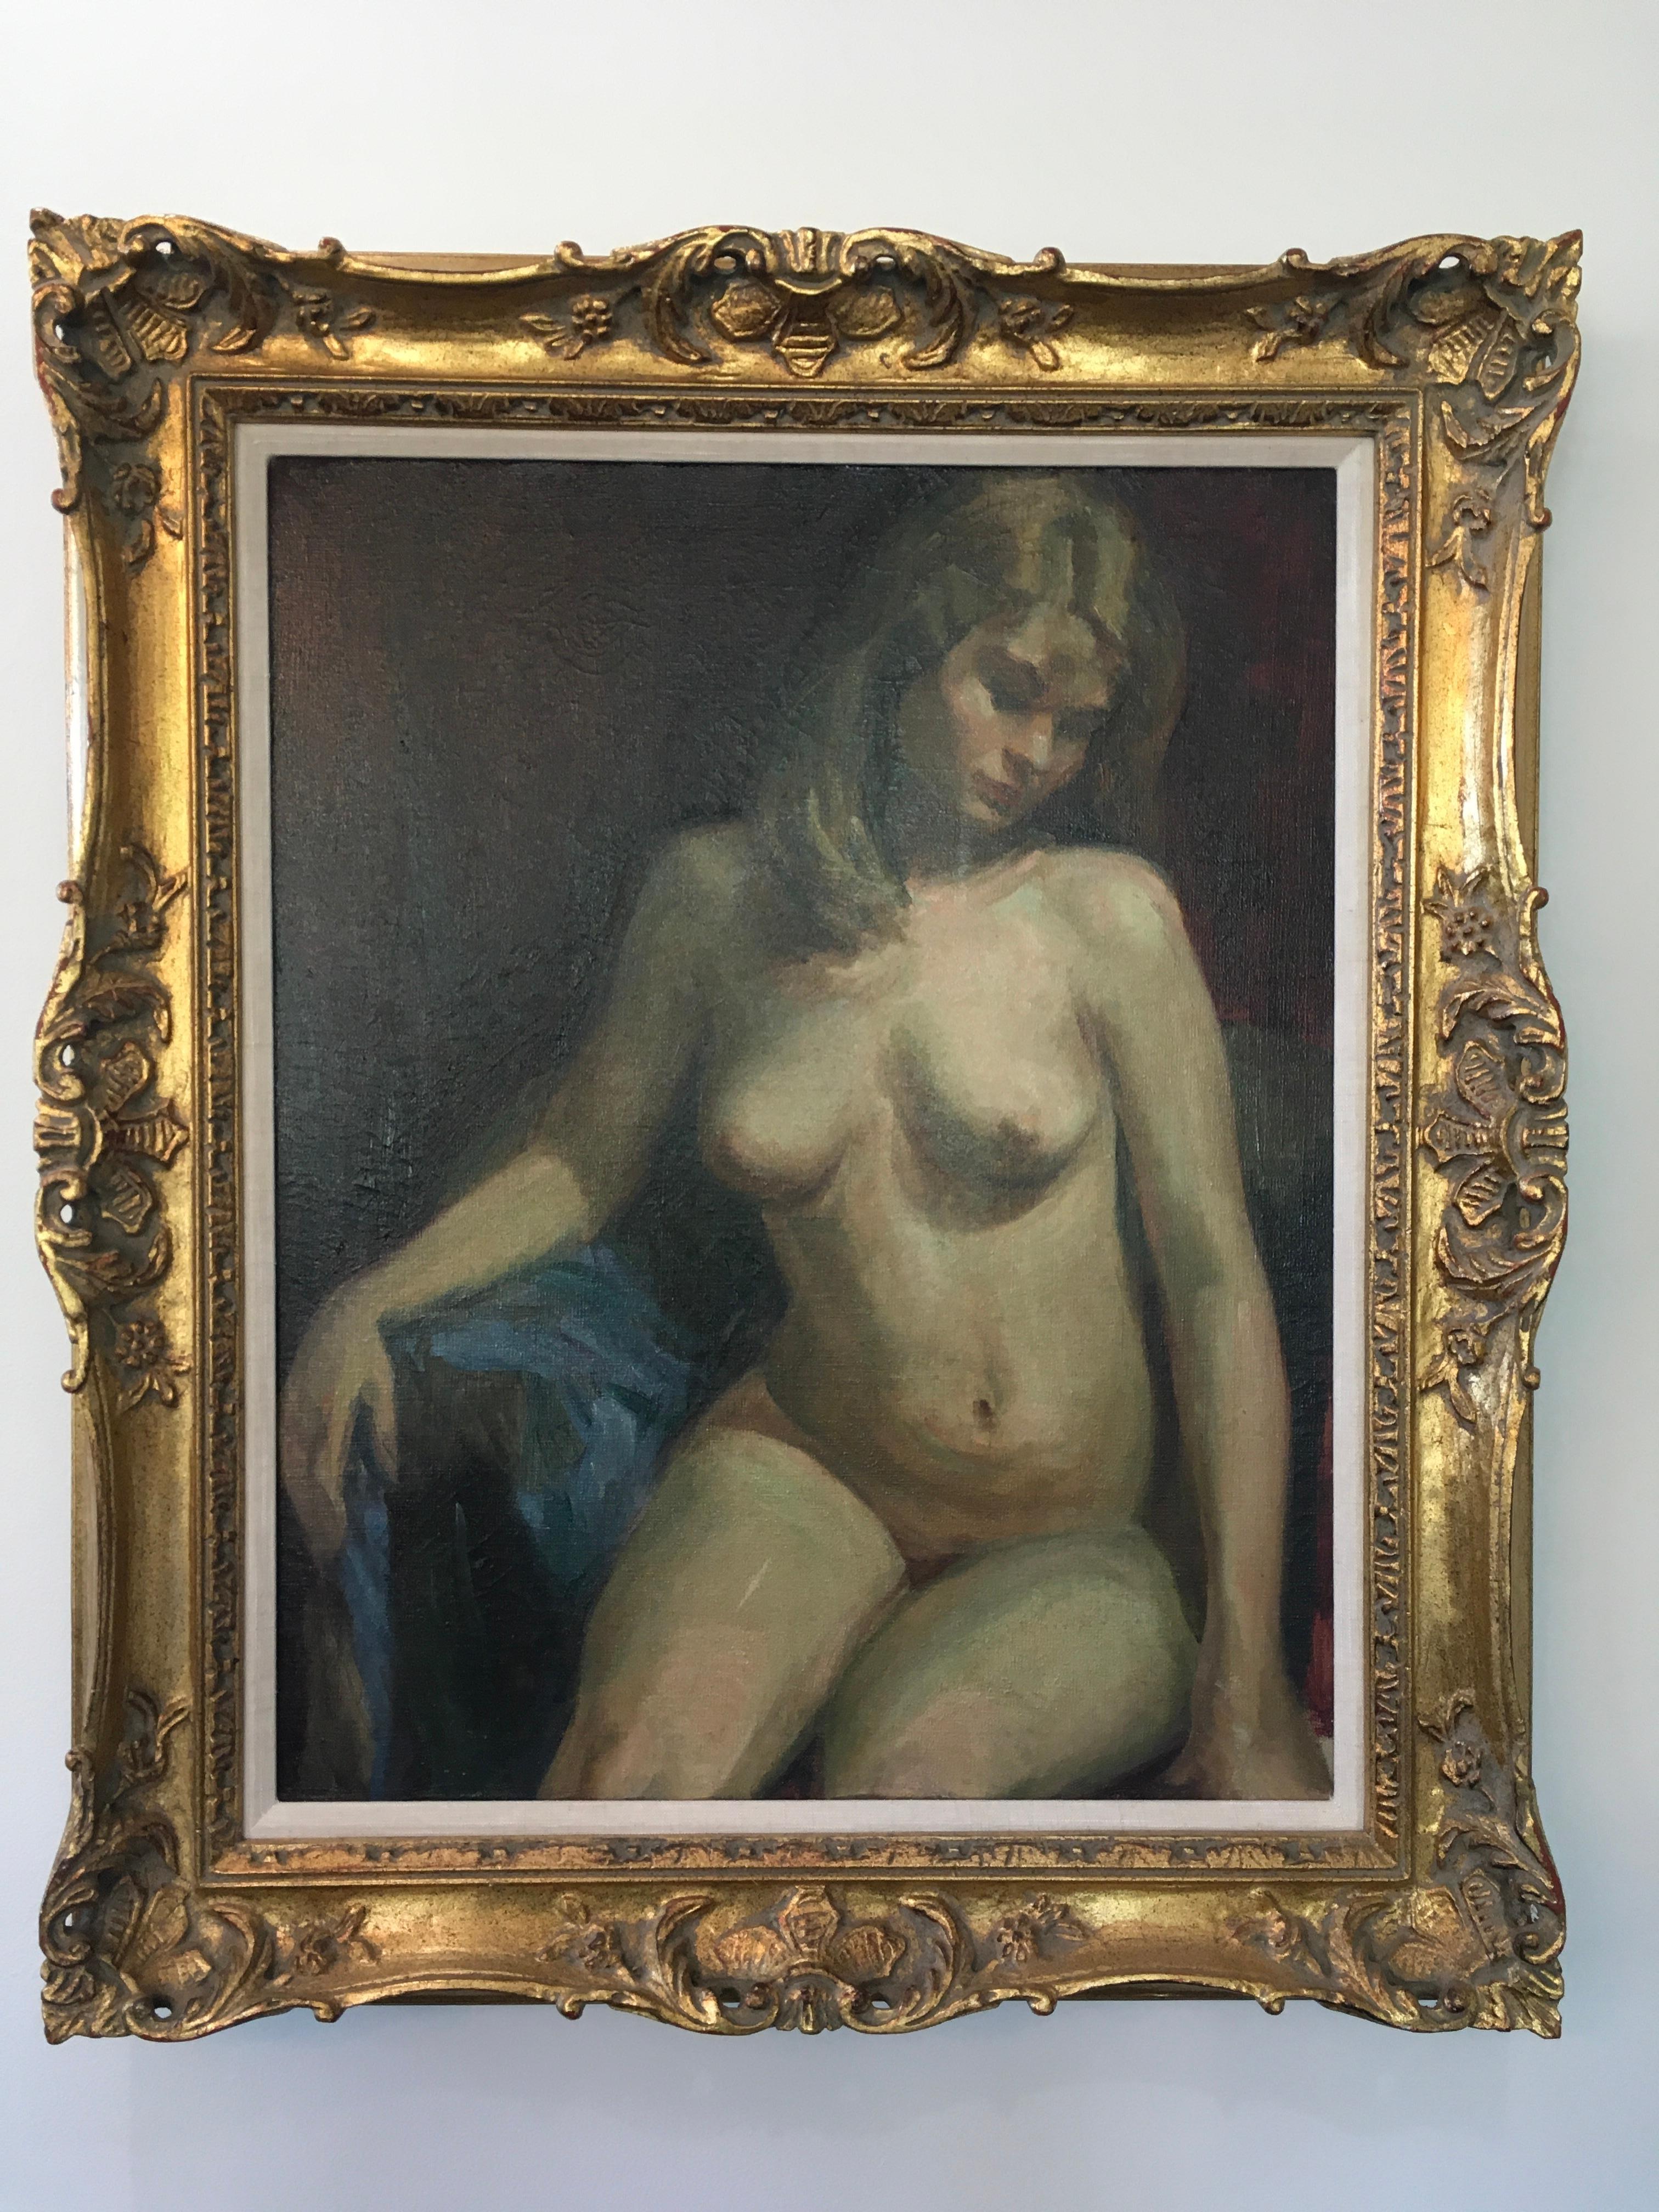 Charles G. Bockmann Figurative Painting - 'Classical Seated Female Nude', by Charles G. Bockman, Oil on Canvas Painting